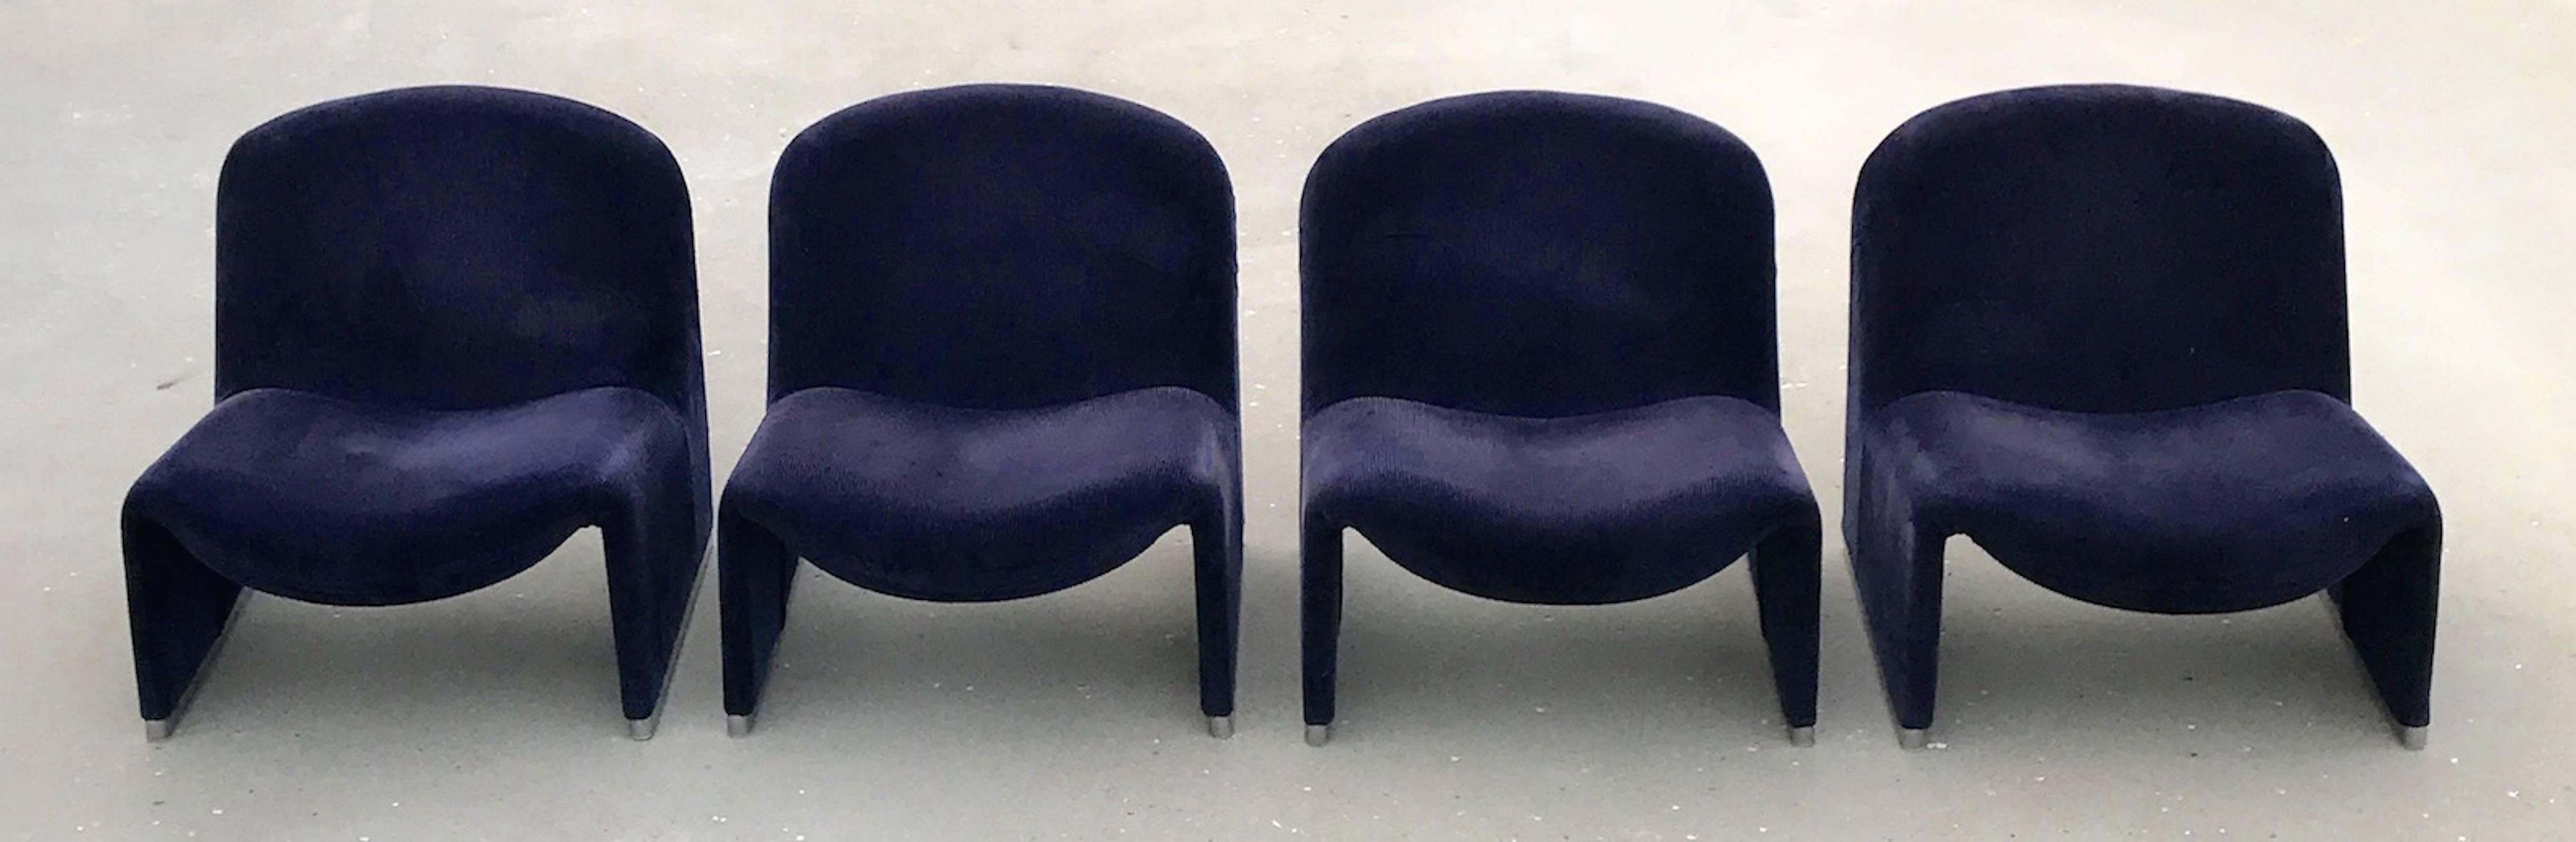 Late 20th Century Blue Corduroy Giancarlo Piretti Alky Lounge Chairs by Castelli